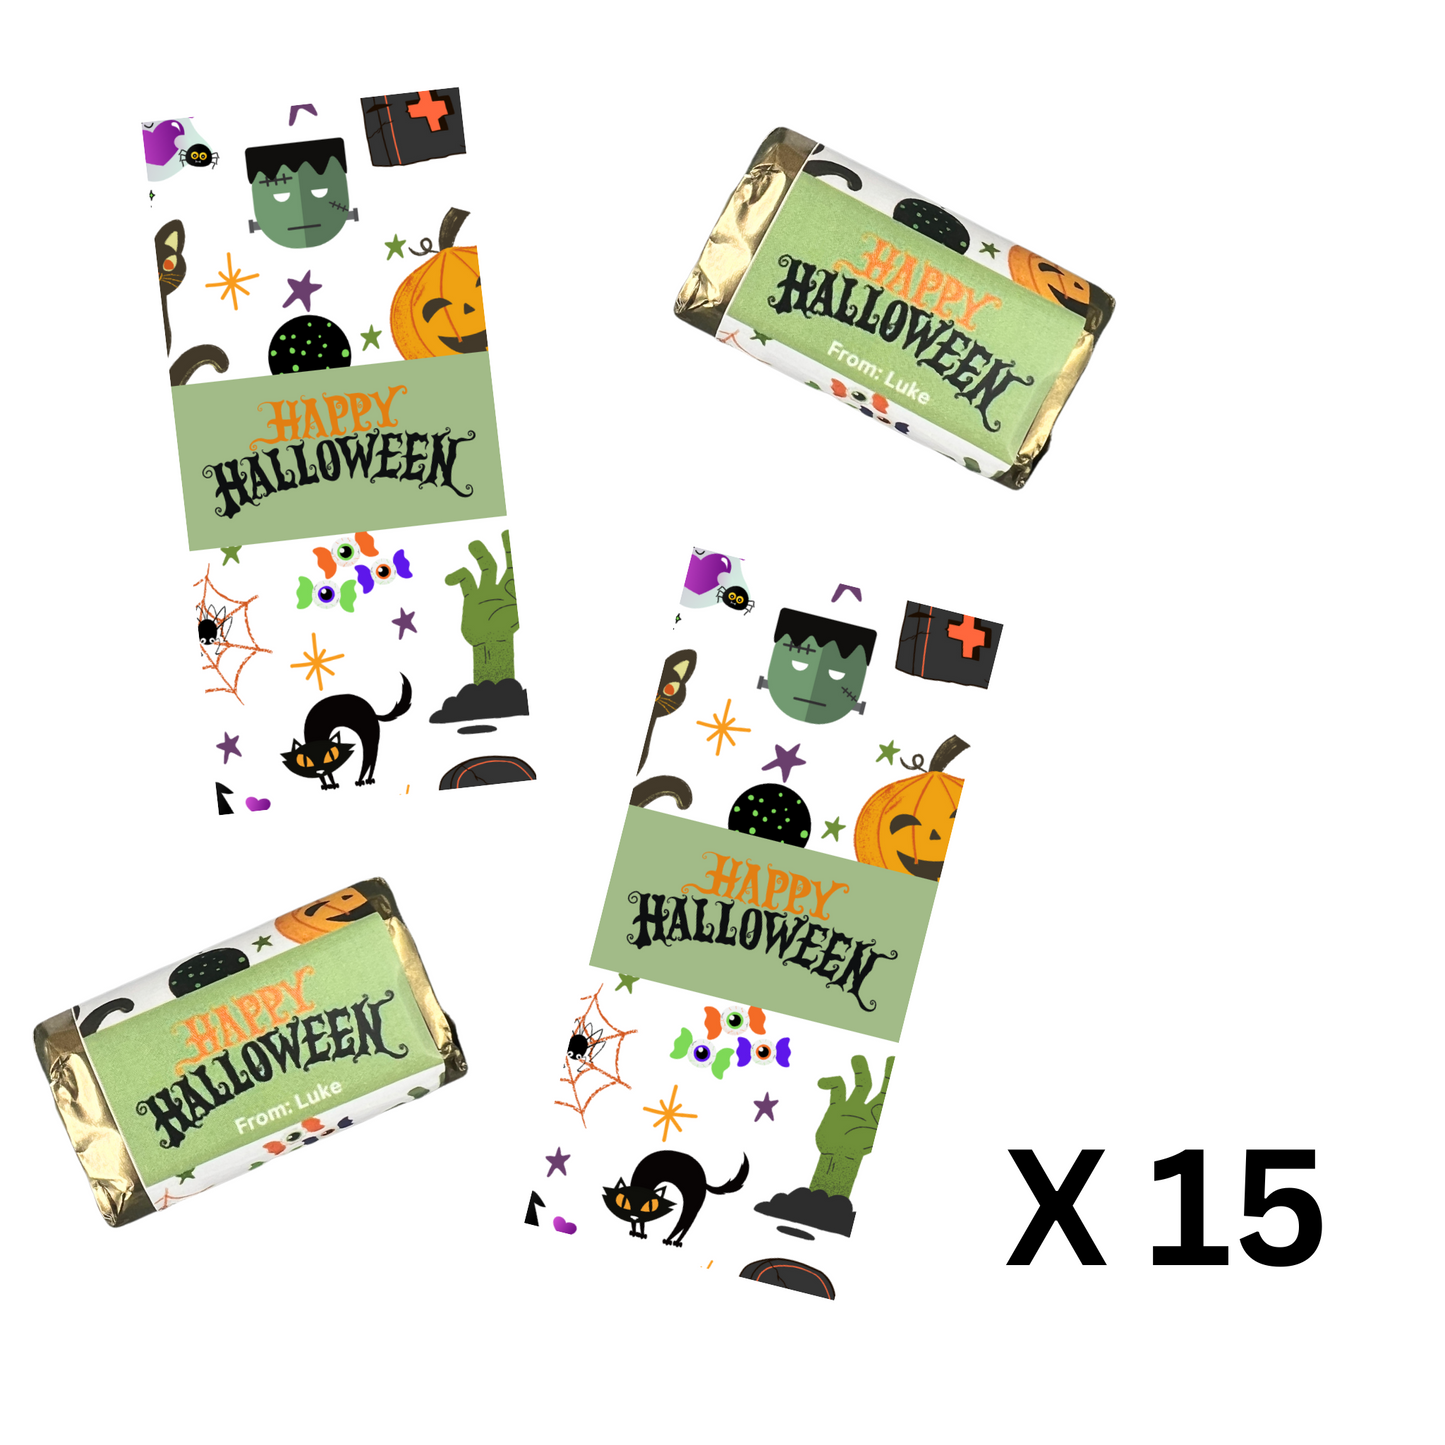 Halloween mini Hershey's candy wrappers x 15